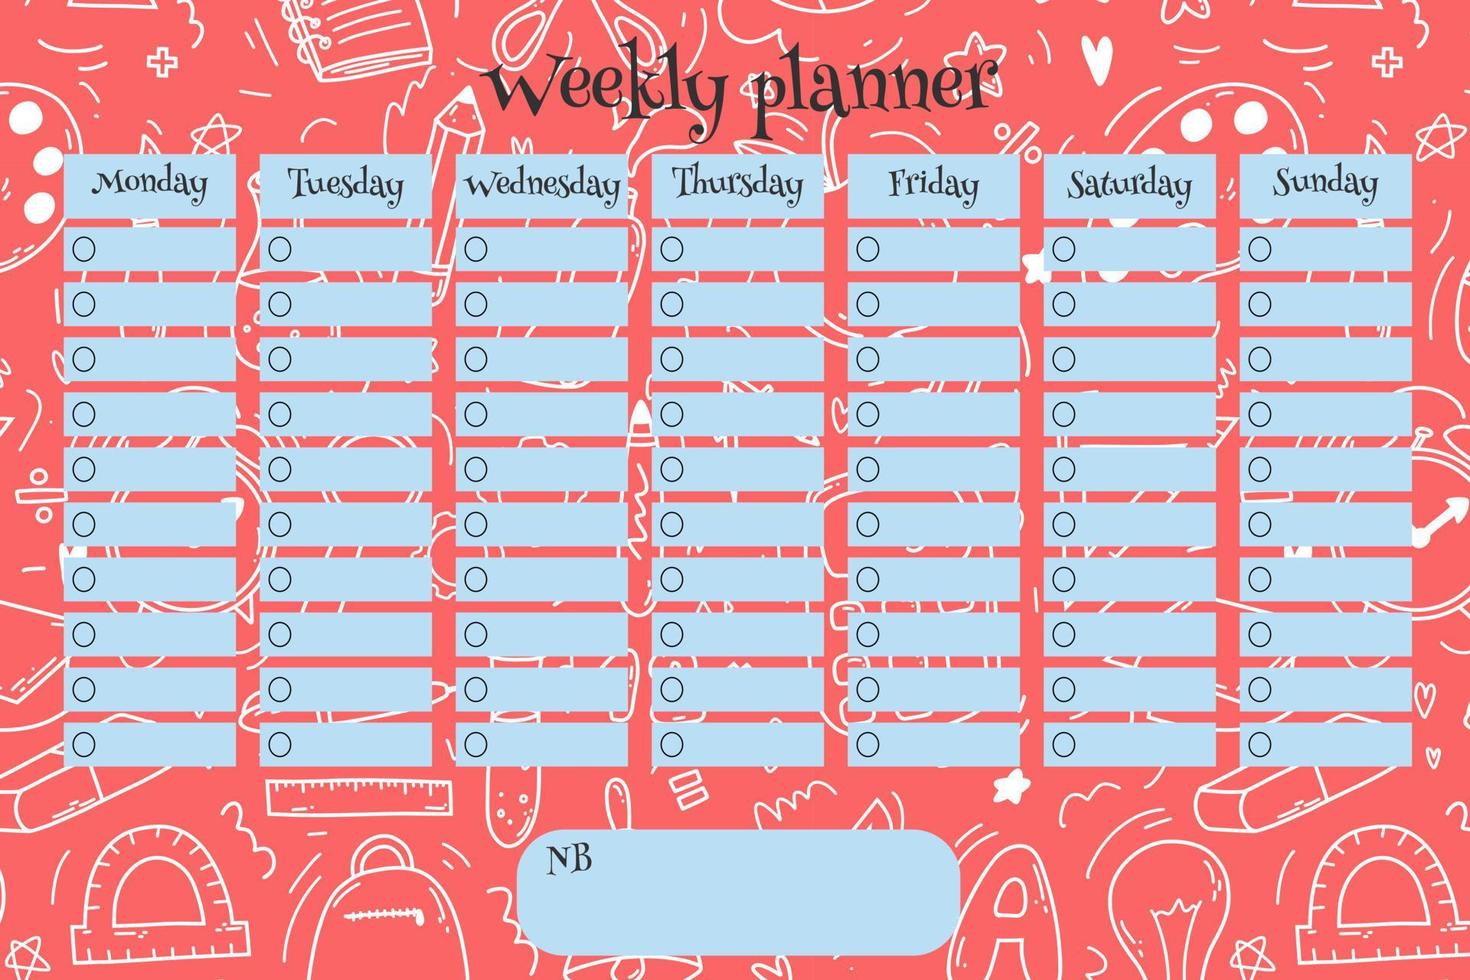 Weekly planner for kids on doodle pink background with school supplies items. Colorful vector illustration for stationary, schedule, list, school timetable, extracurricular activities.